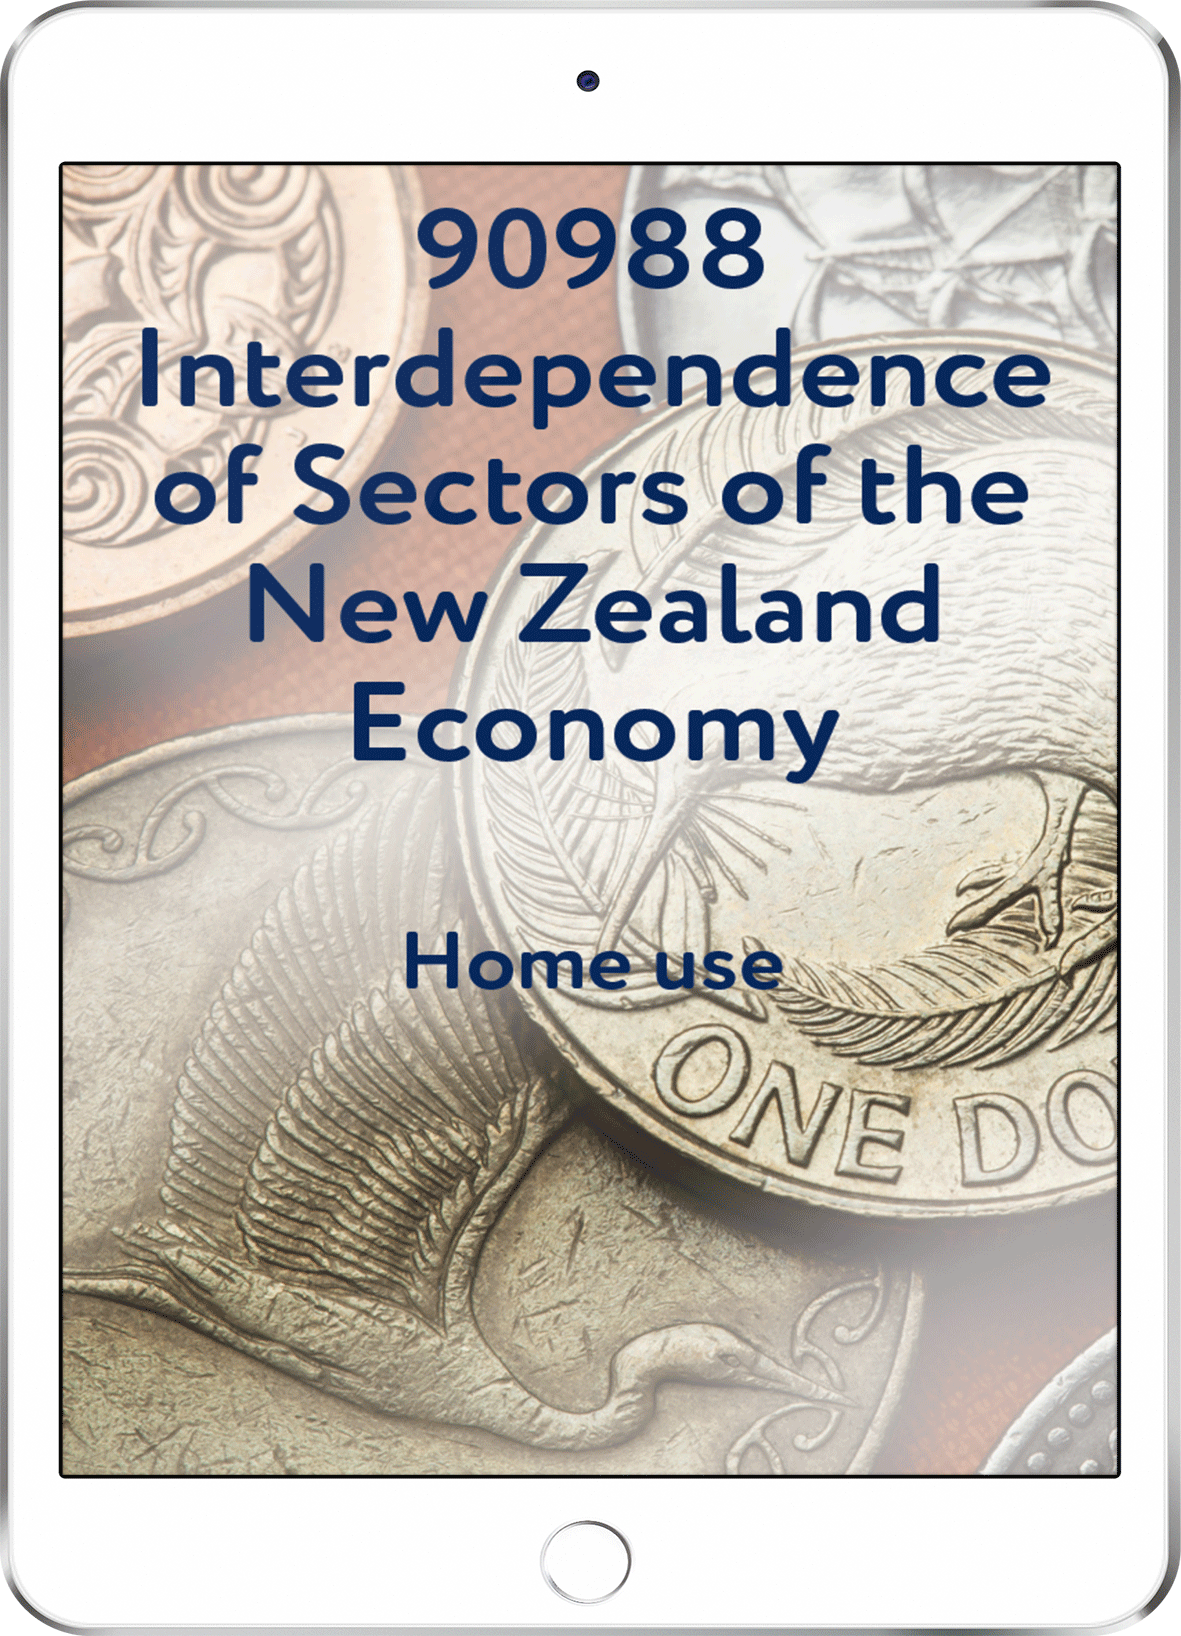 90988 Interdependence of Sectors of the New Zealand Economy - Home Use